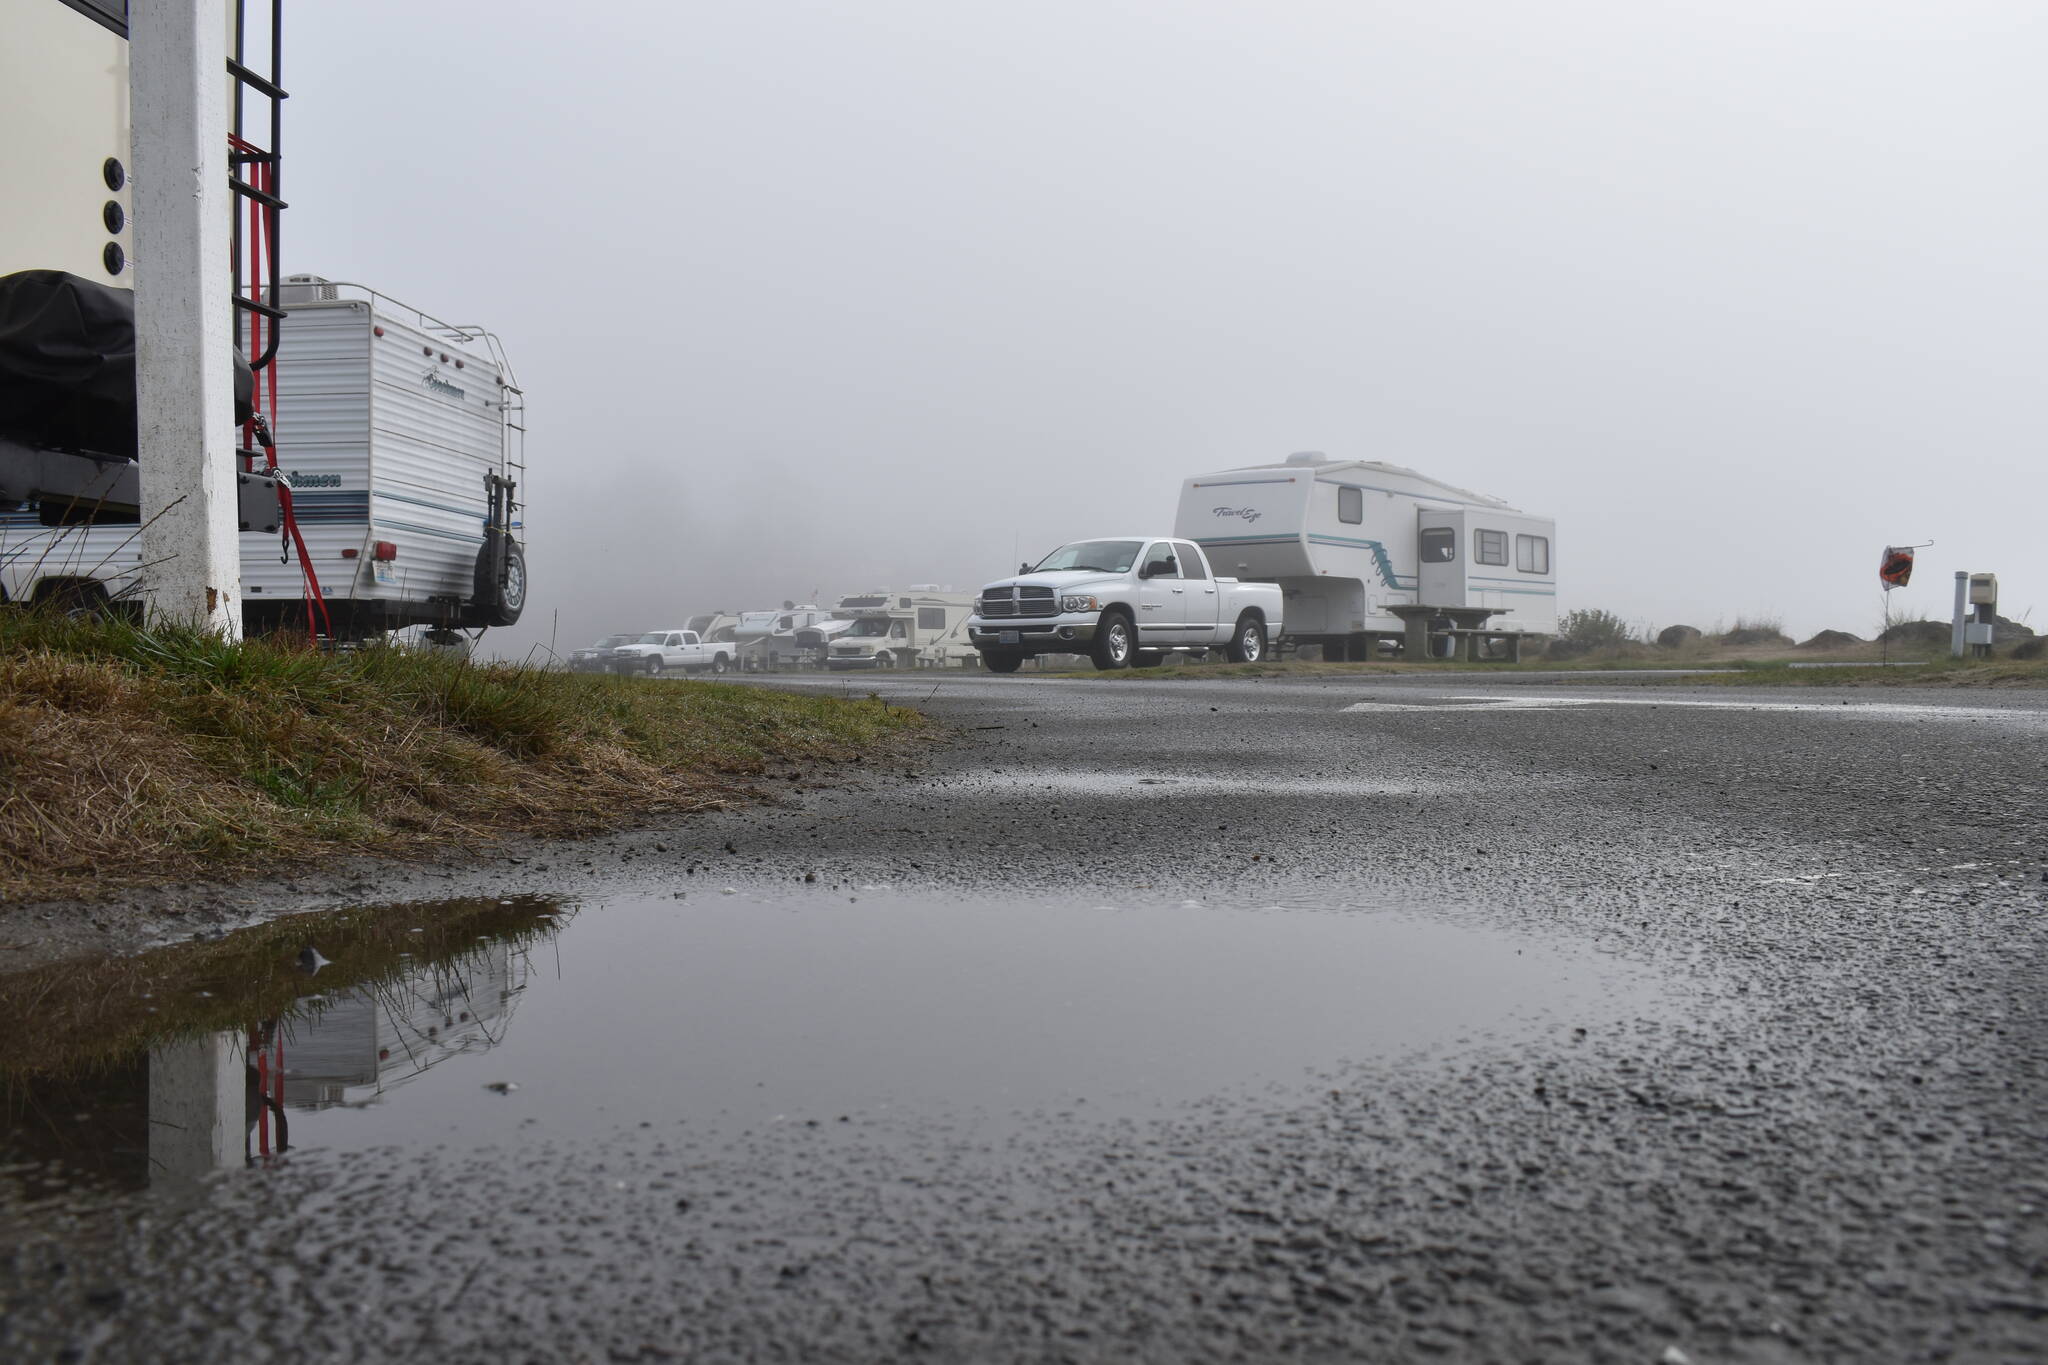 Clayton Franke | The Daily World 
Light rain dampened roads and camping vehicles at Pacific Beach State Park the morning of Thursday, Oct. 20.